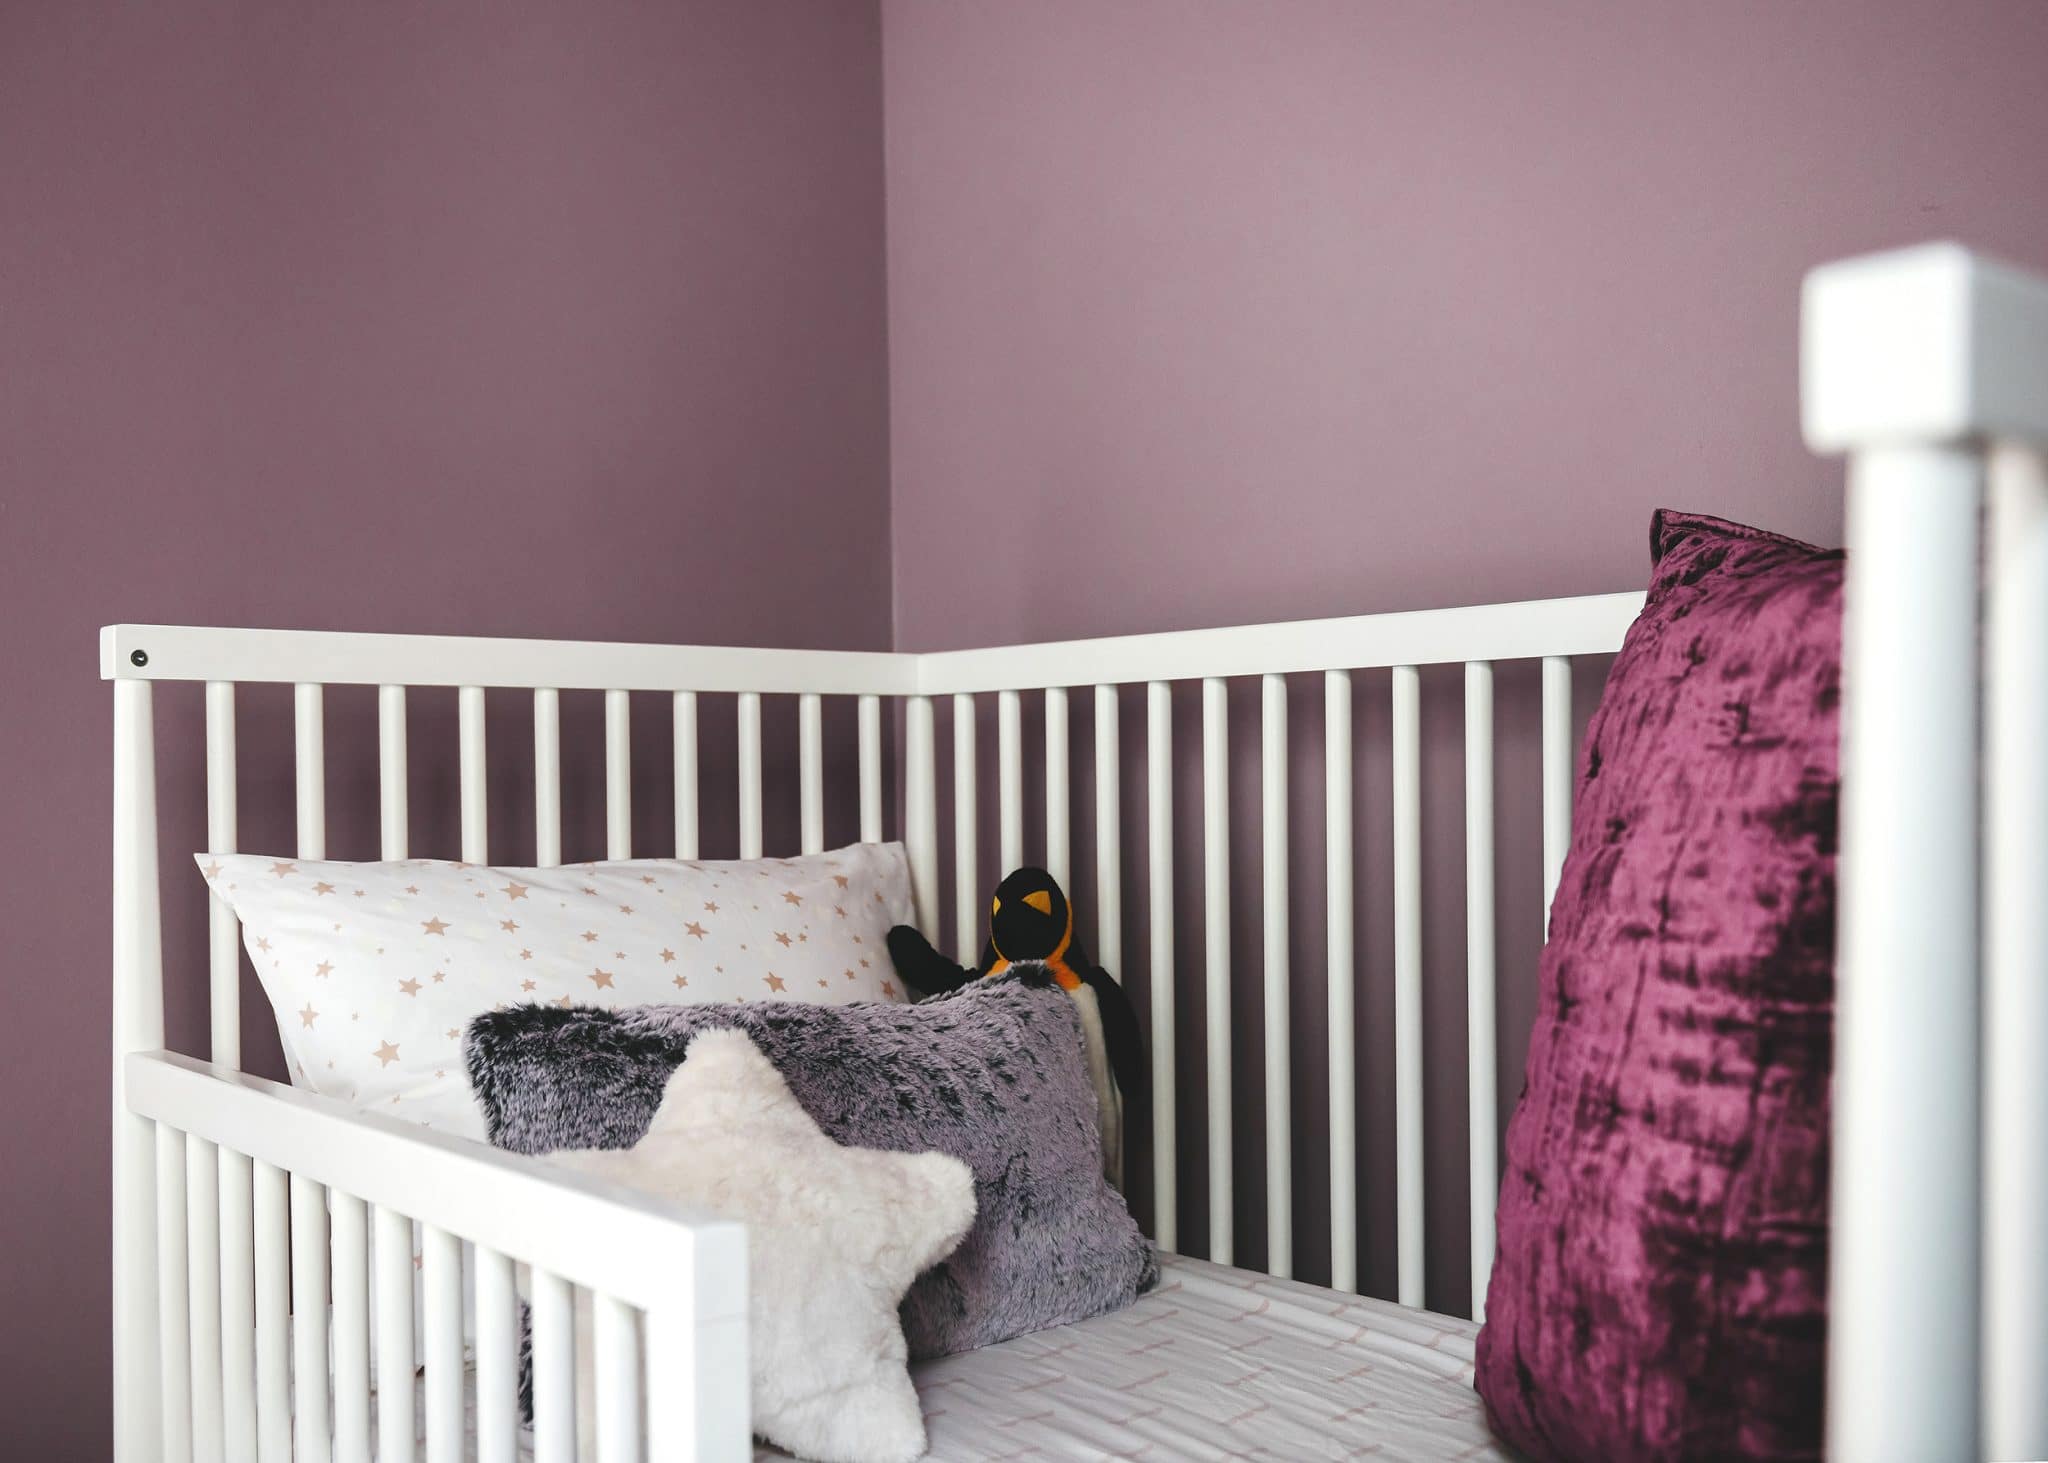 A close-up of Lucy's bed with purple walls | color is Valspar Mellow Mauve 1004-7C | via Yellow Brick Home